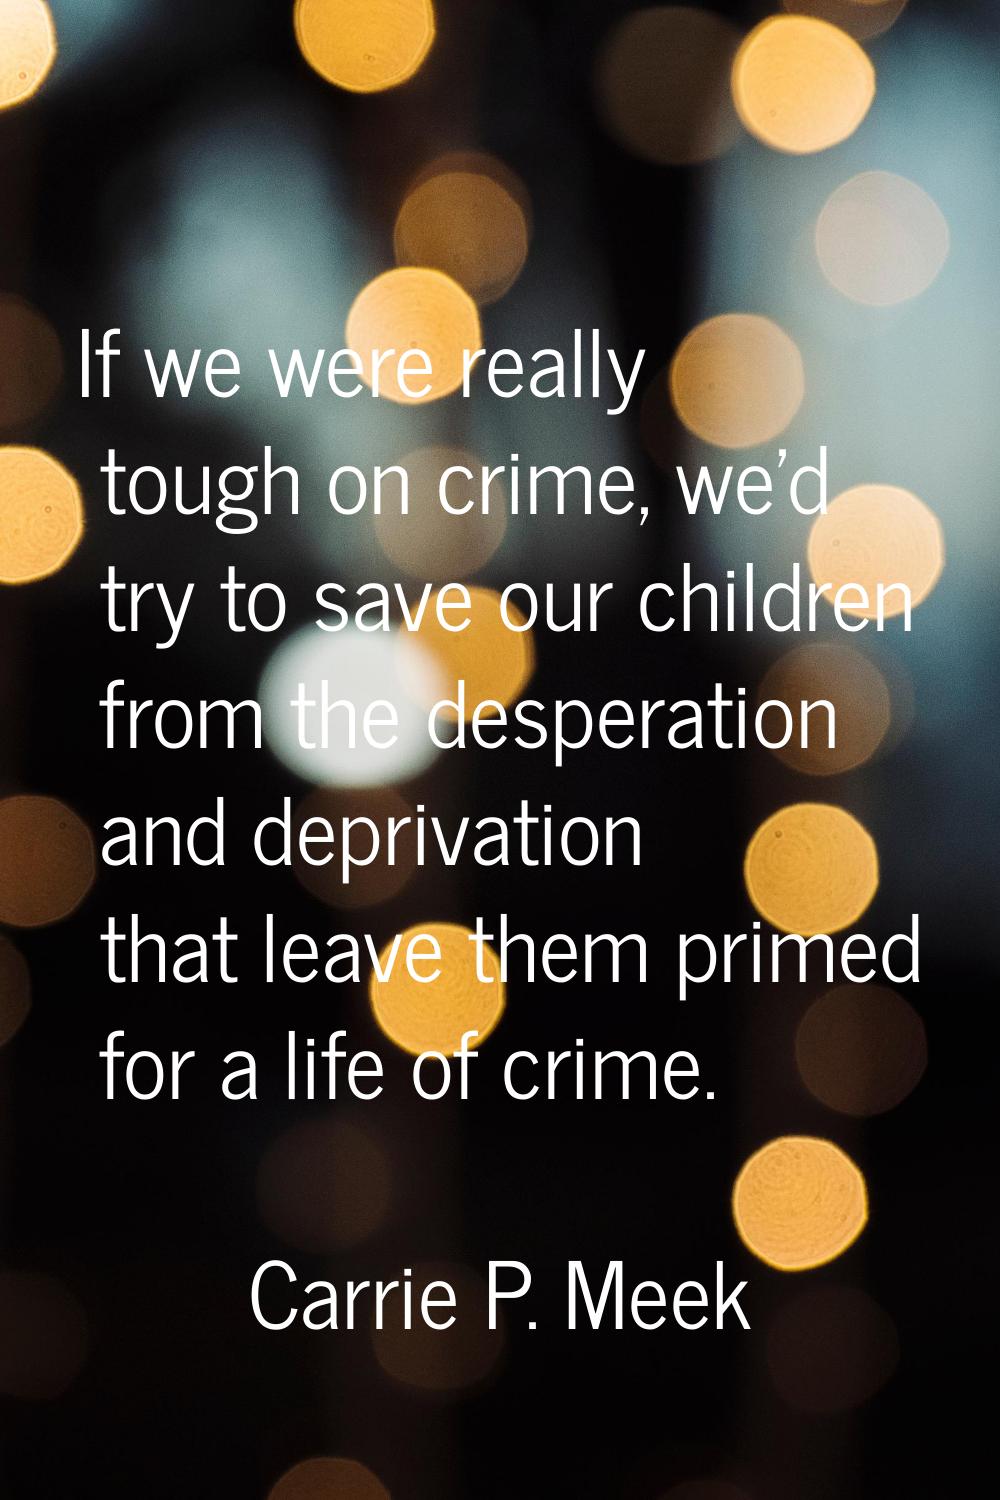 If we were really tough on crime, we'd try to save our children from the desperation and deprivatio